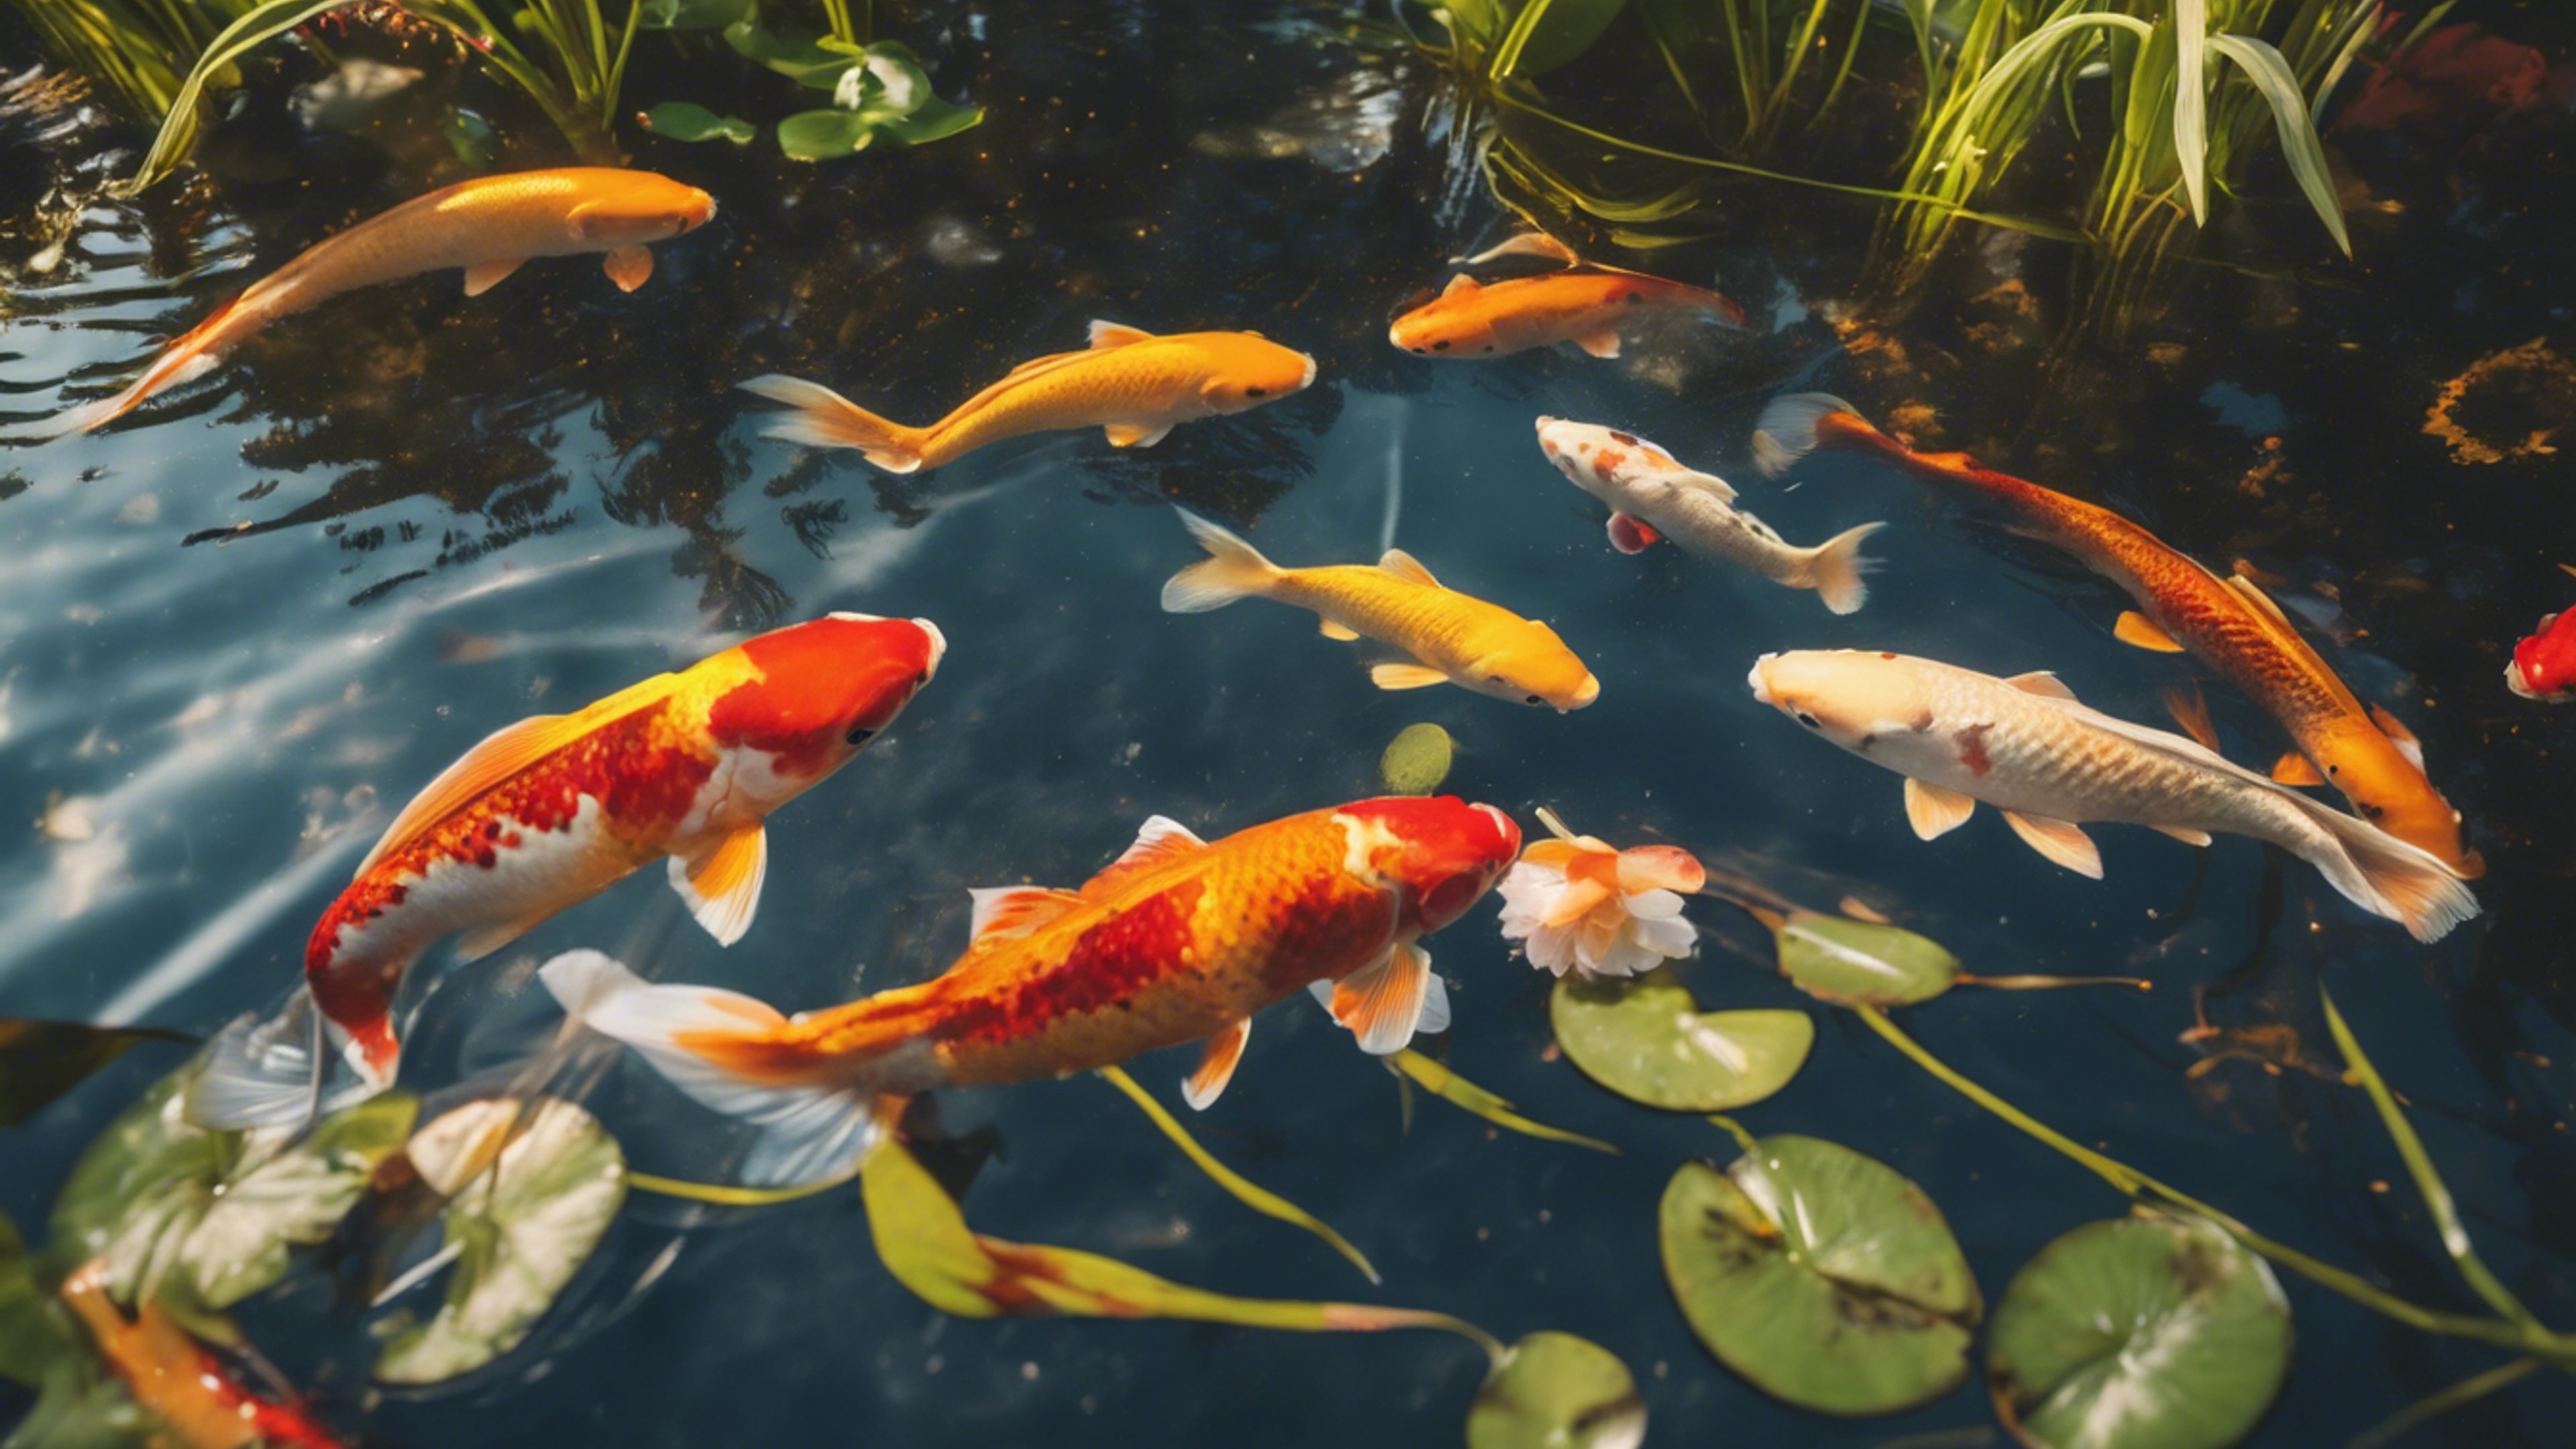 A koi pond with fish swirling under the lilies, their cool red and vibrant yellow scales shimmering under the sun. Дэлгэцийн зураг[e1c53d91cfb64fffb364]